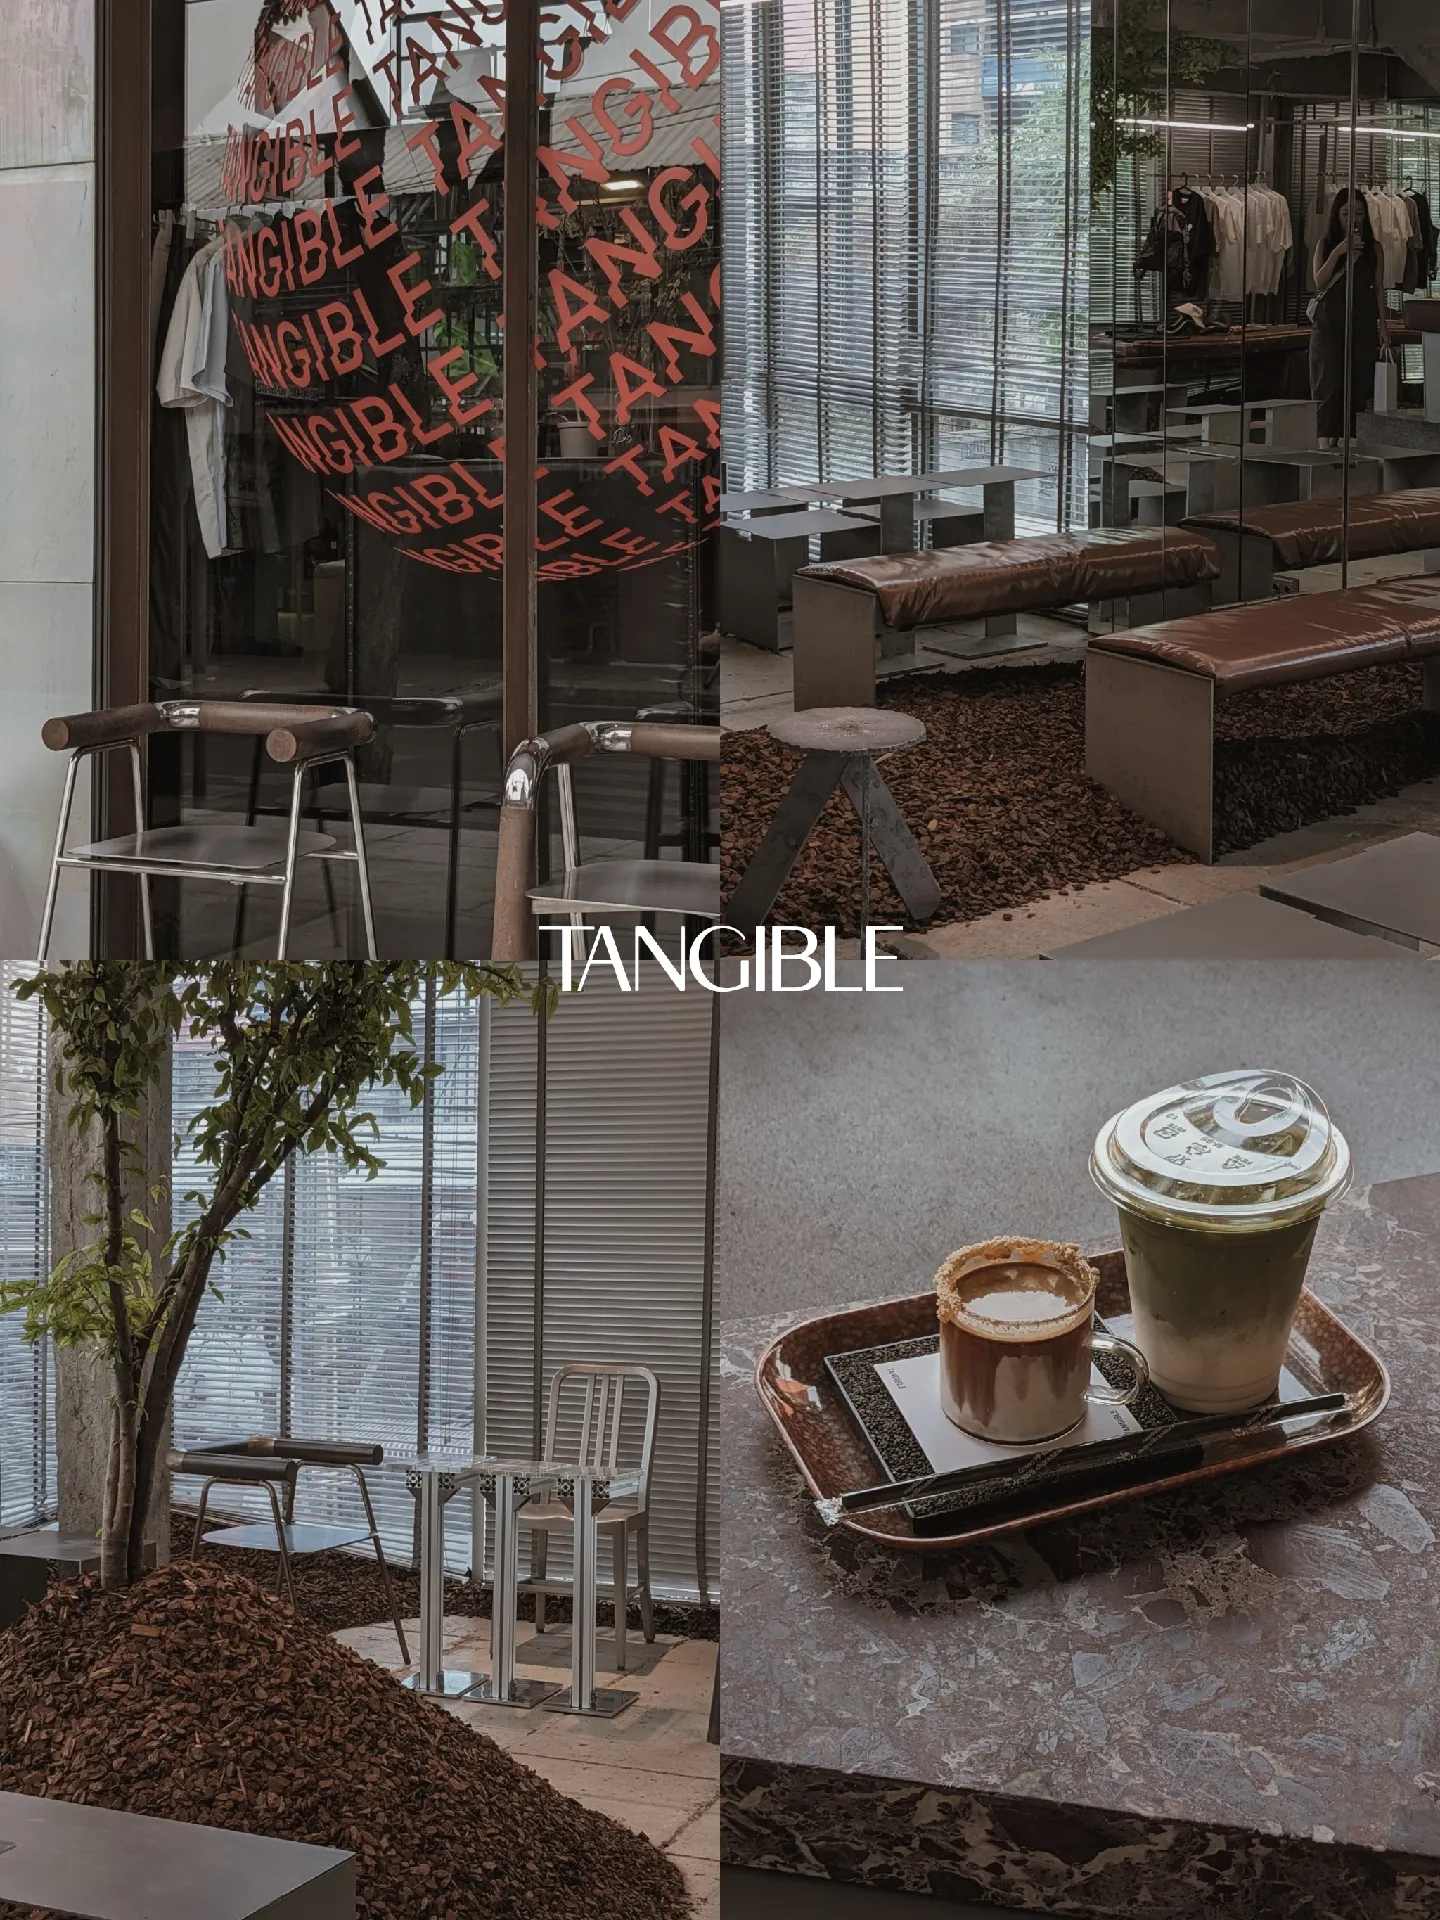 rating all the cafes i tried in bangkok ☕🇹🇭's images(8)